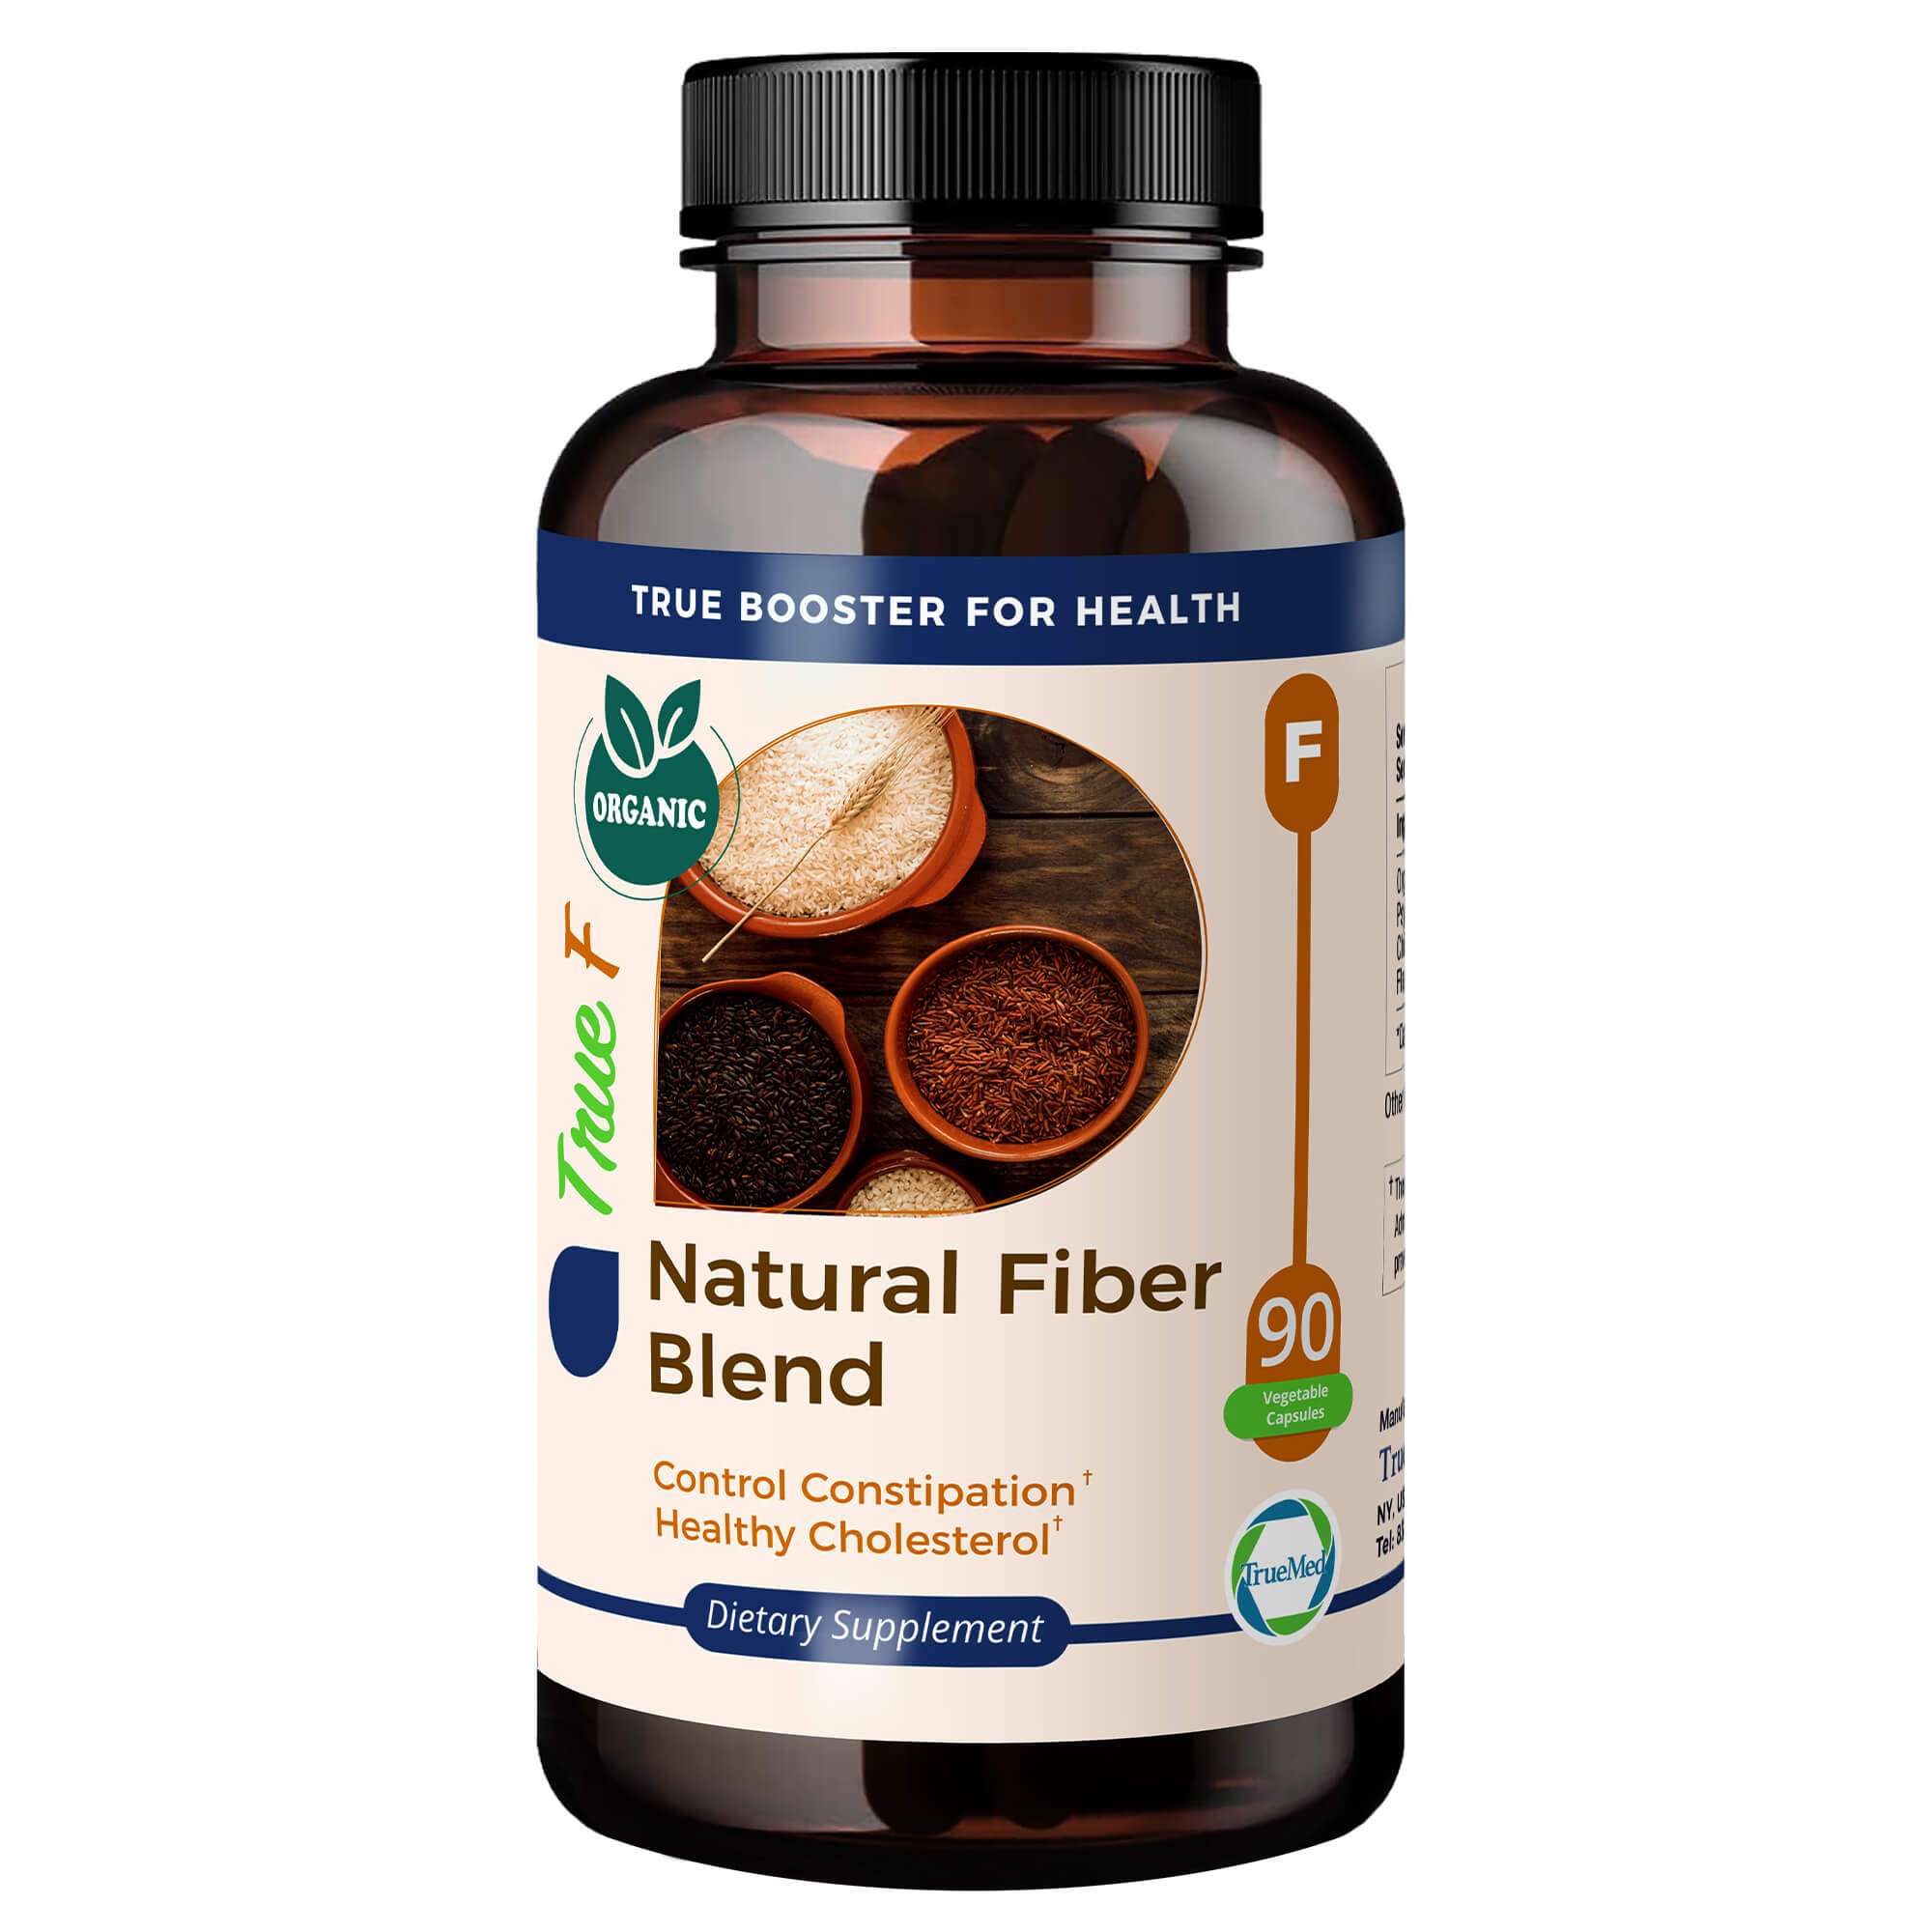 Natural fiber blend supplement 90 Capsules, Truemed Organic flax seed Powder 750 mg front image